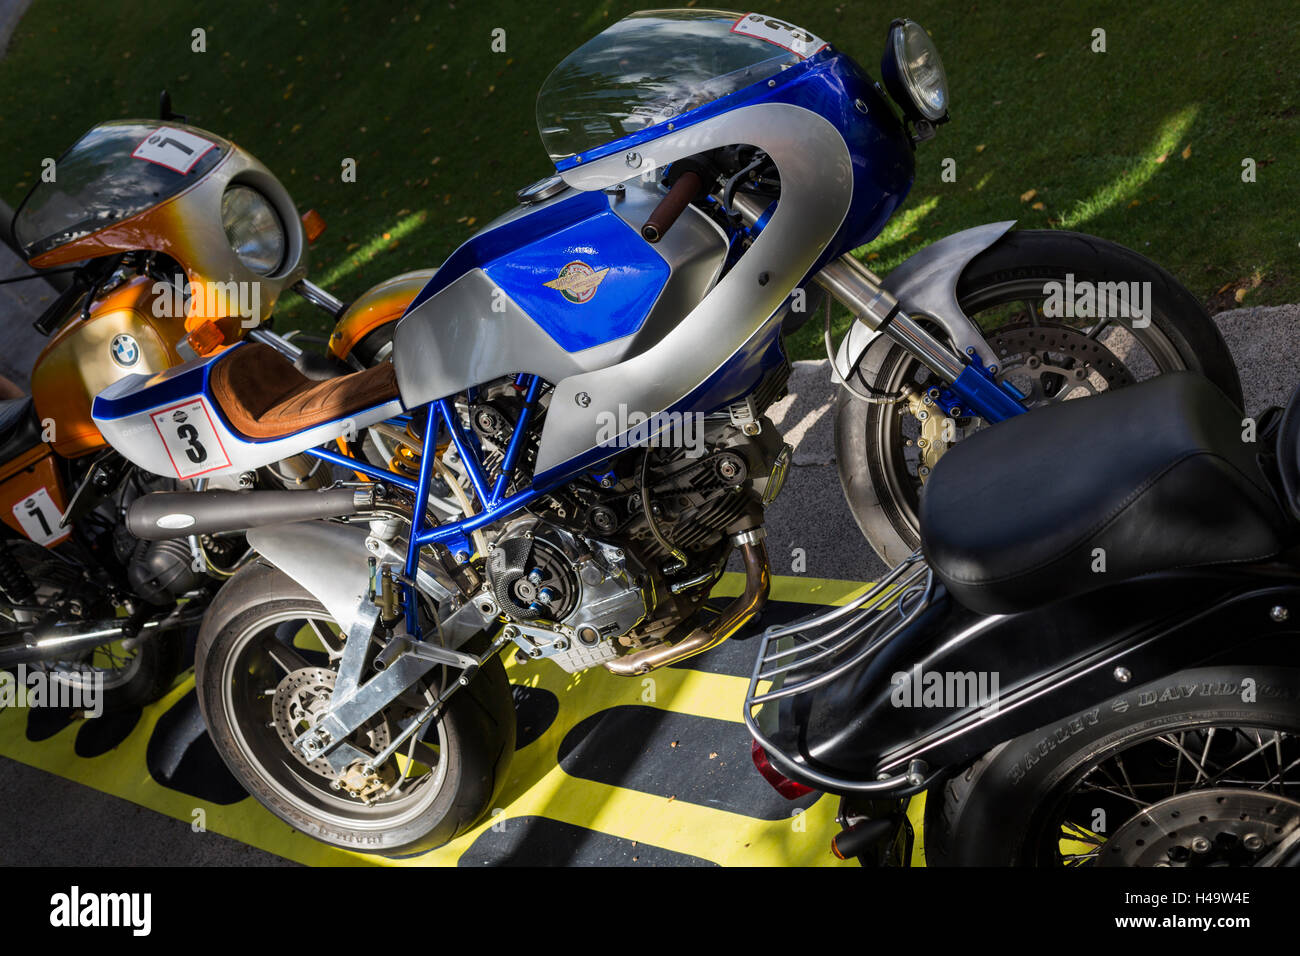 Ducati desmo and bmw at the Mencey Hotel in Santa Cruz de Tenerife for the start of the Queens Cavalcade event, during which 91 motorcycles will spend 4 days completing various routes throughout the Canary Islands. Stock Photo